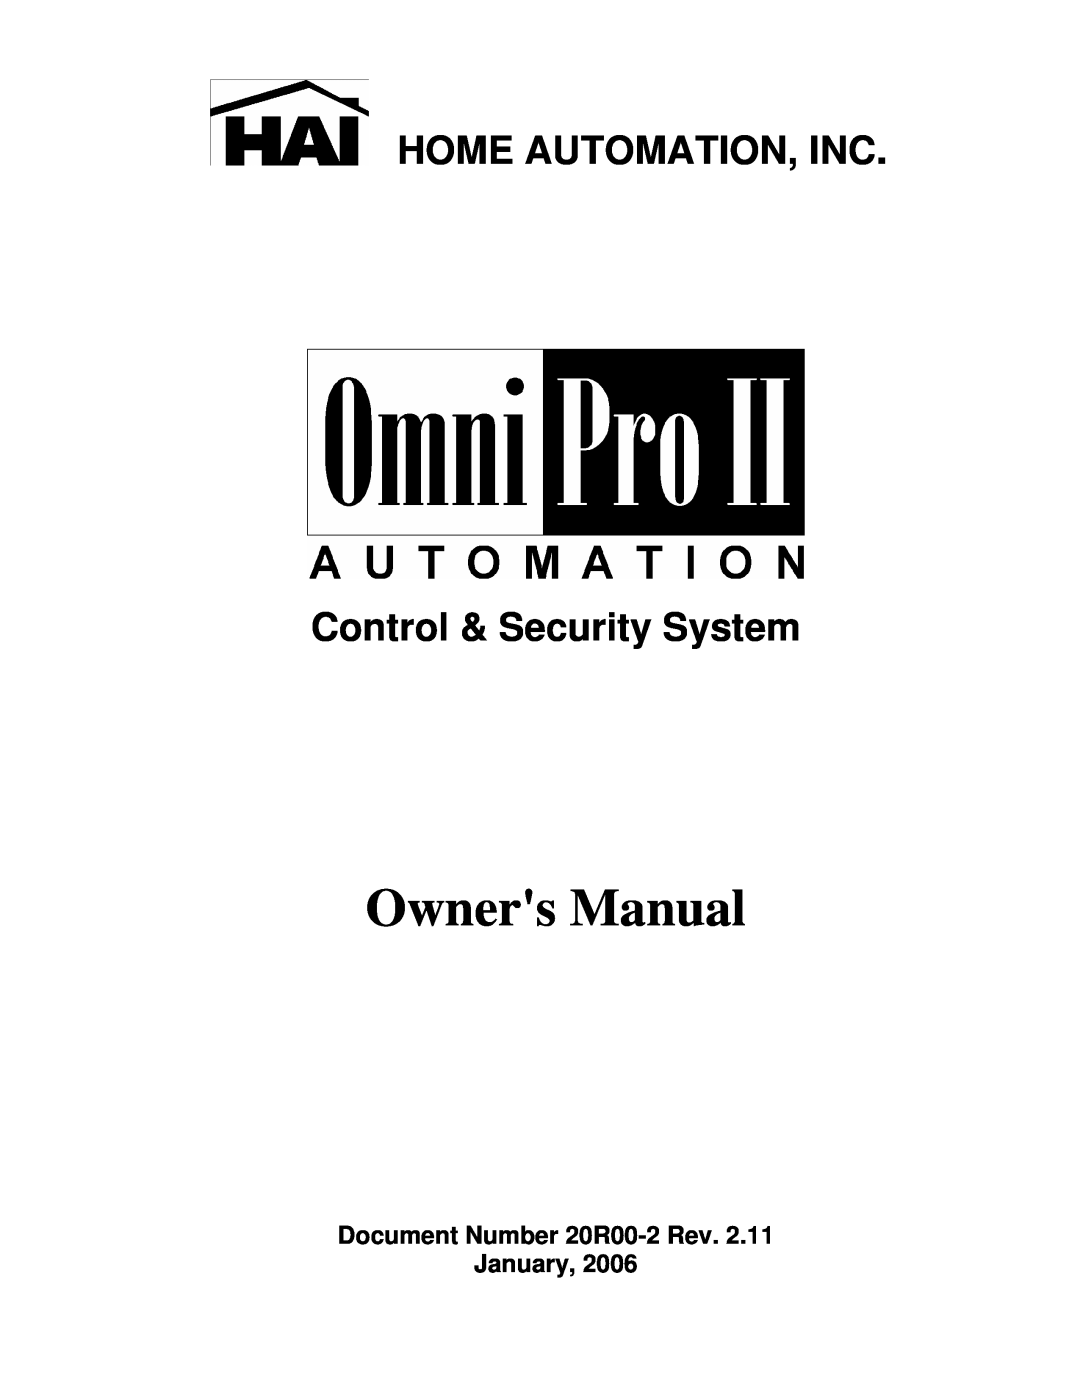 Home Automation OmniPro II owner manual Home Automation, Inc, Control & Security System 